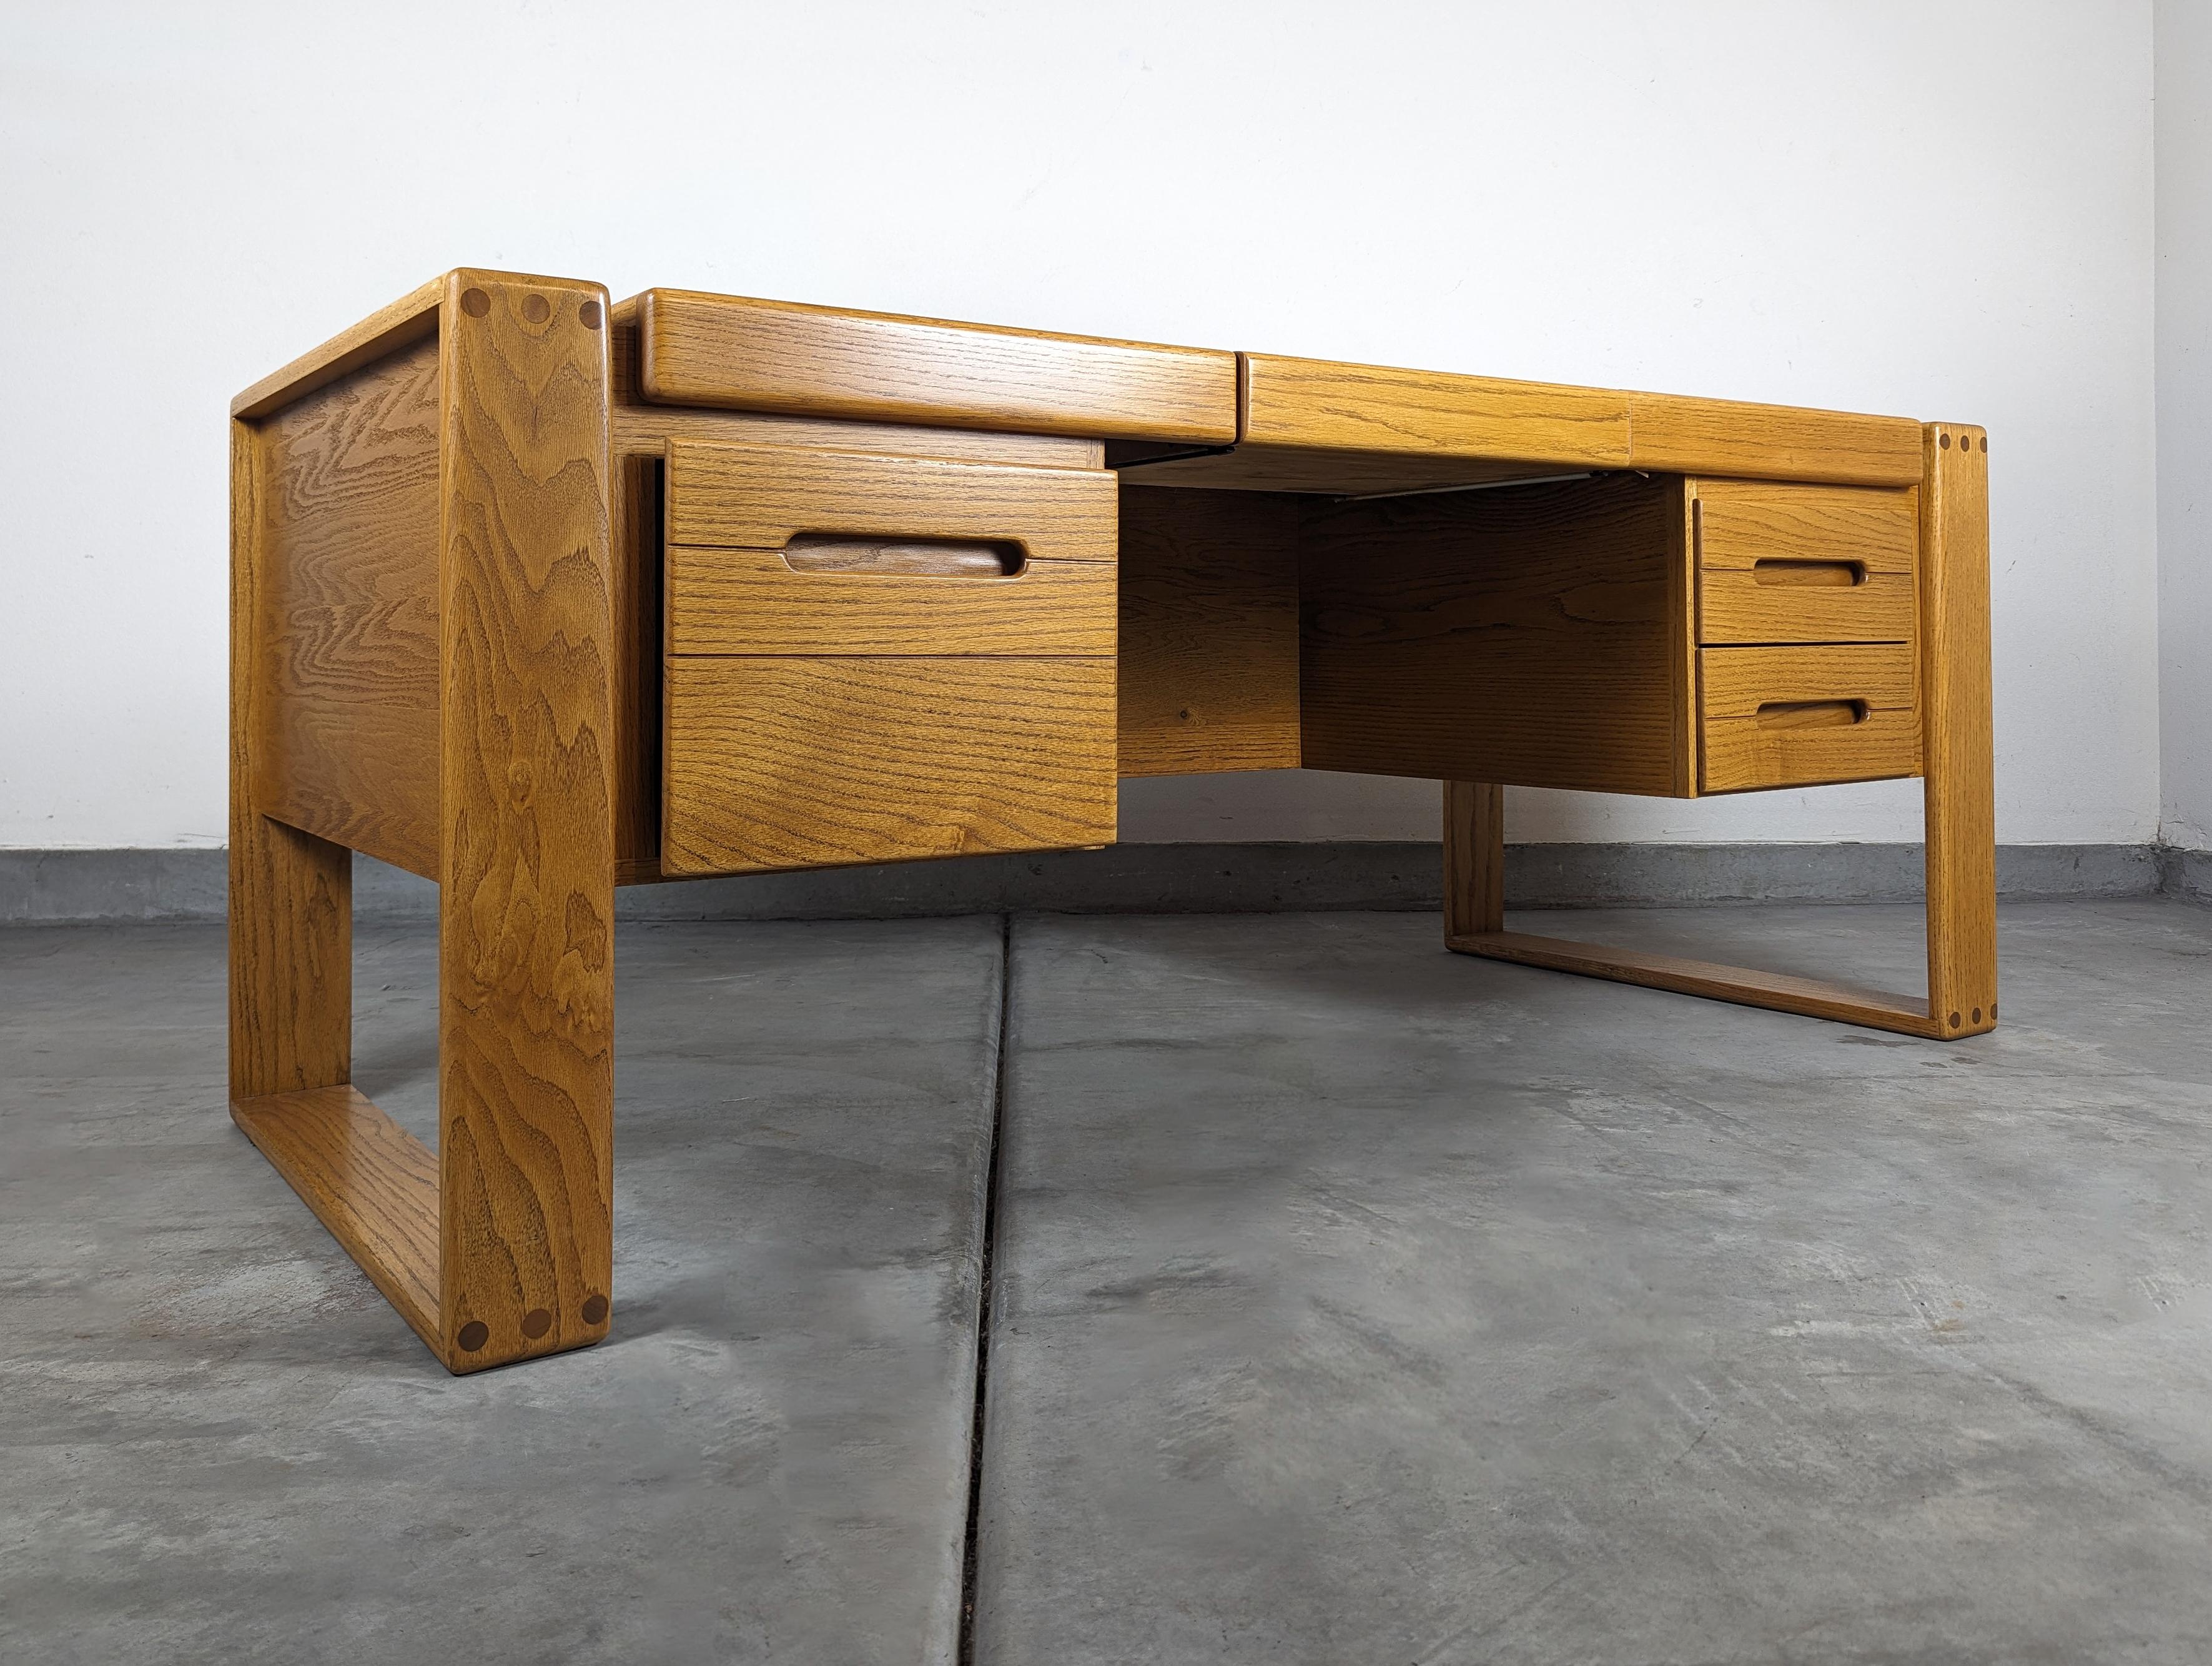 For sale is a stunning, professionally refinished desk designed by the iconic Lou Hodges for the California Design Group in 1981. This piece is a true testament to Hodges' unparalleled craftsmanship and keen sense of functional design.

The desk is